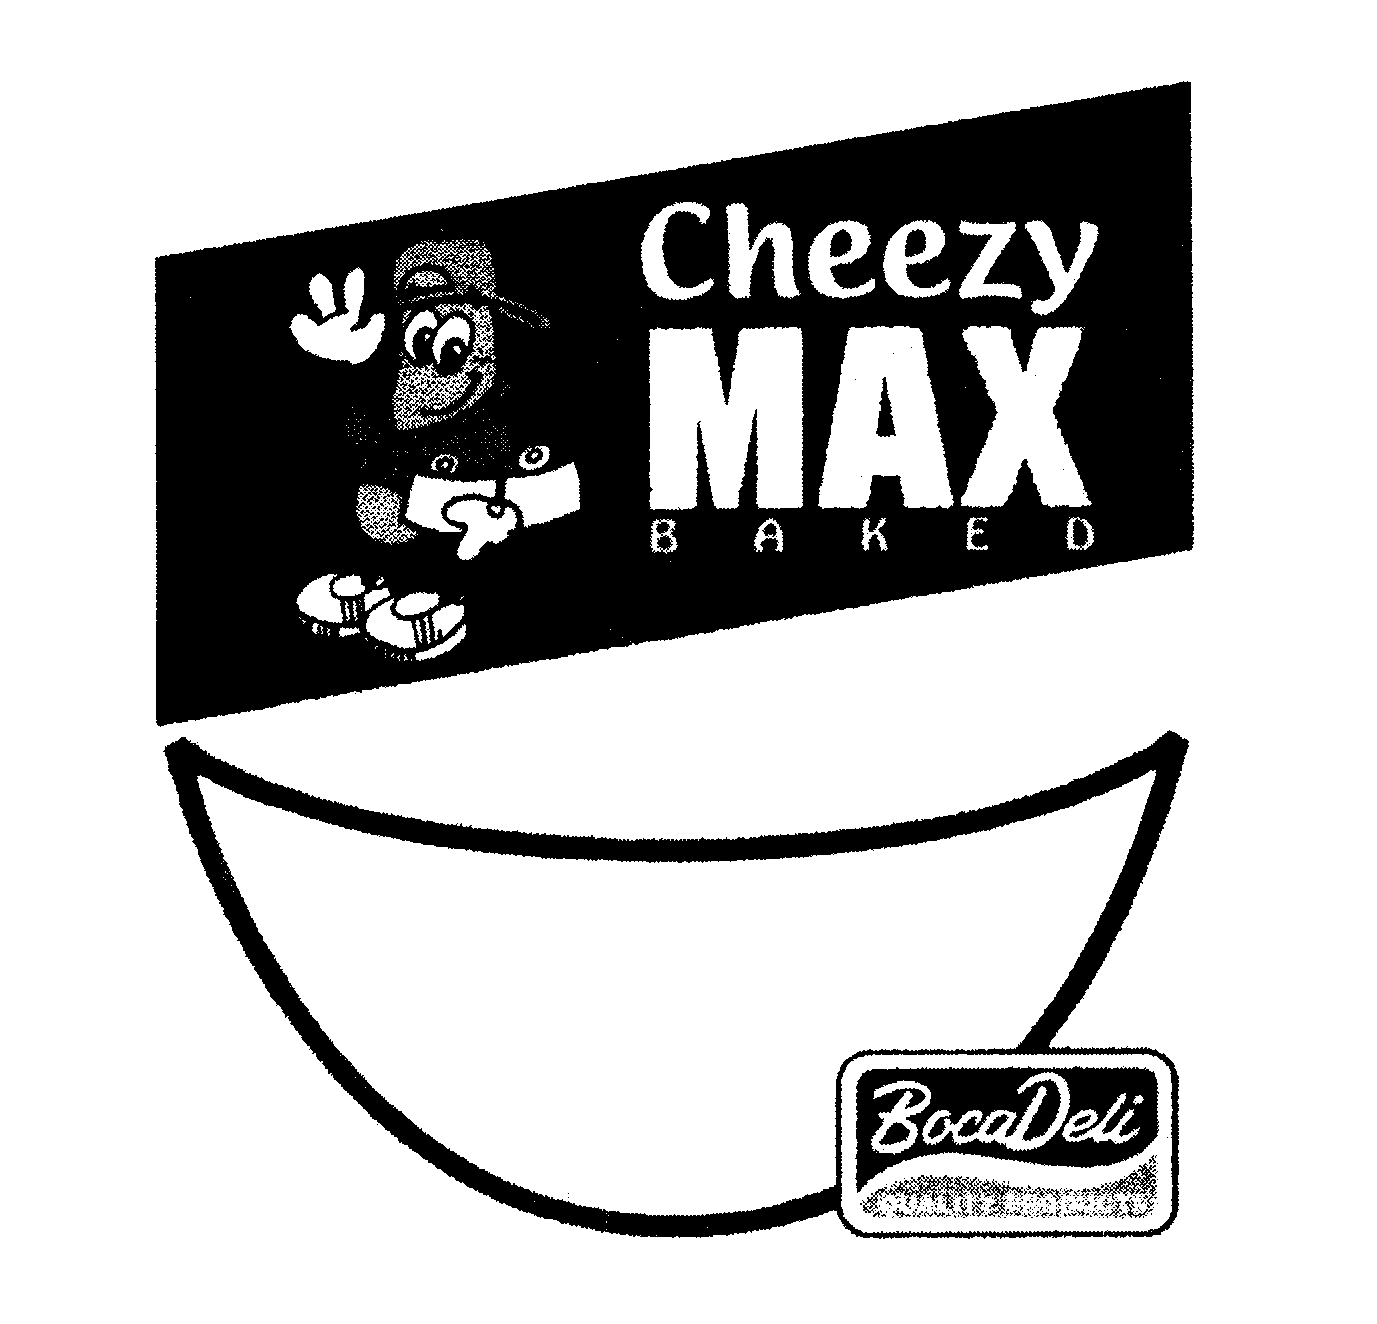  CHEEZY MAX BAKED BOCA DELI QUALITY PRODUCTS